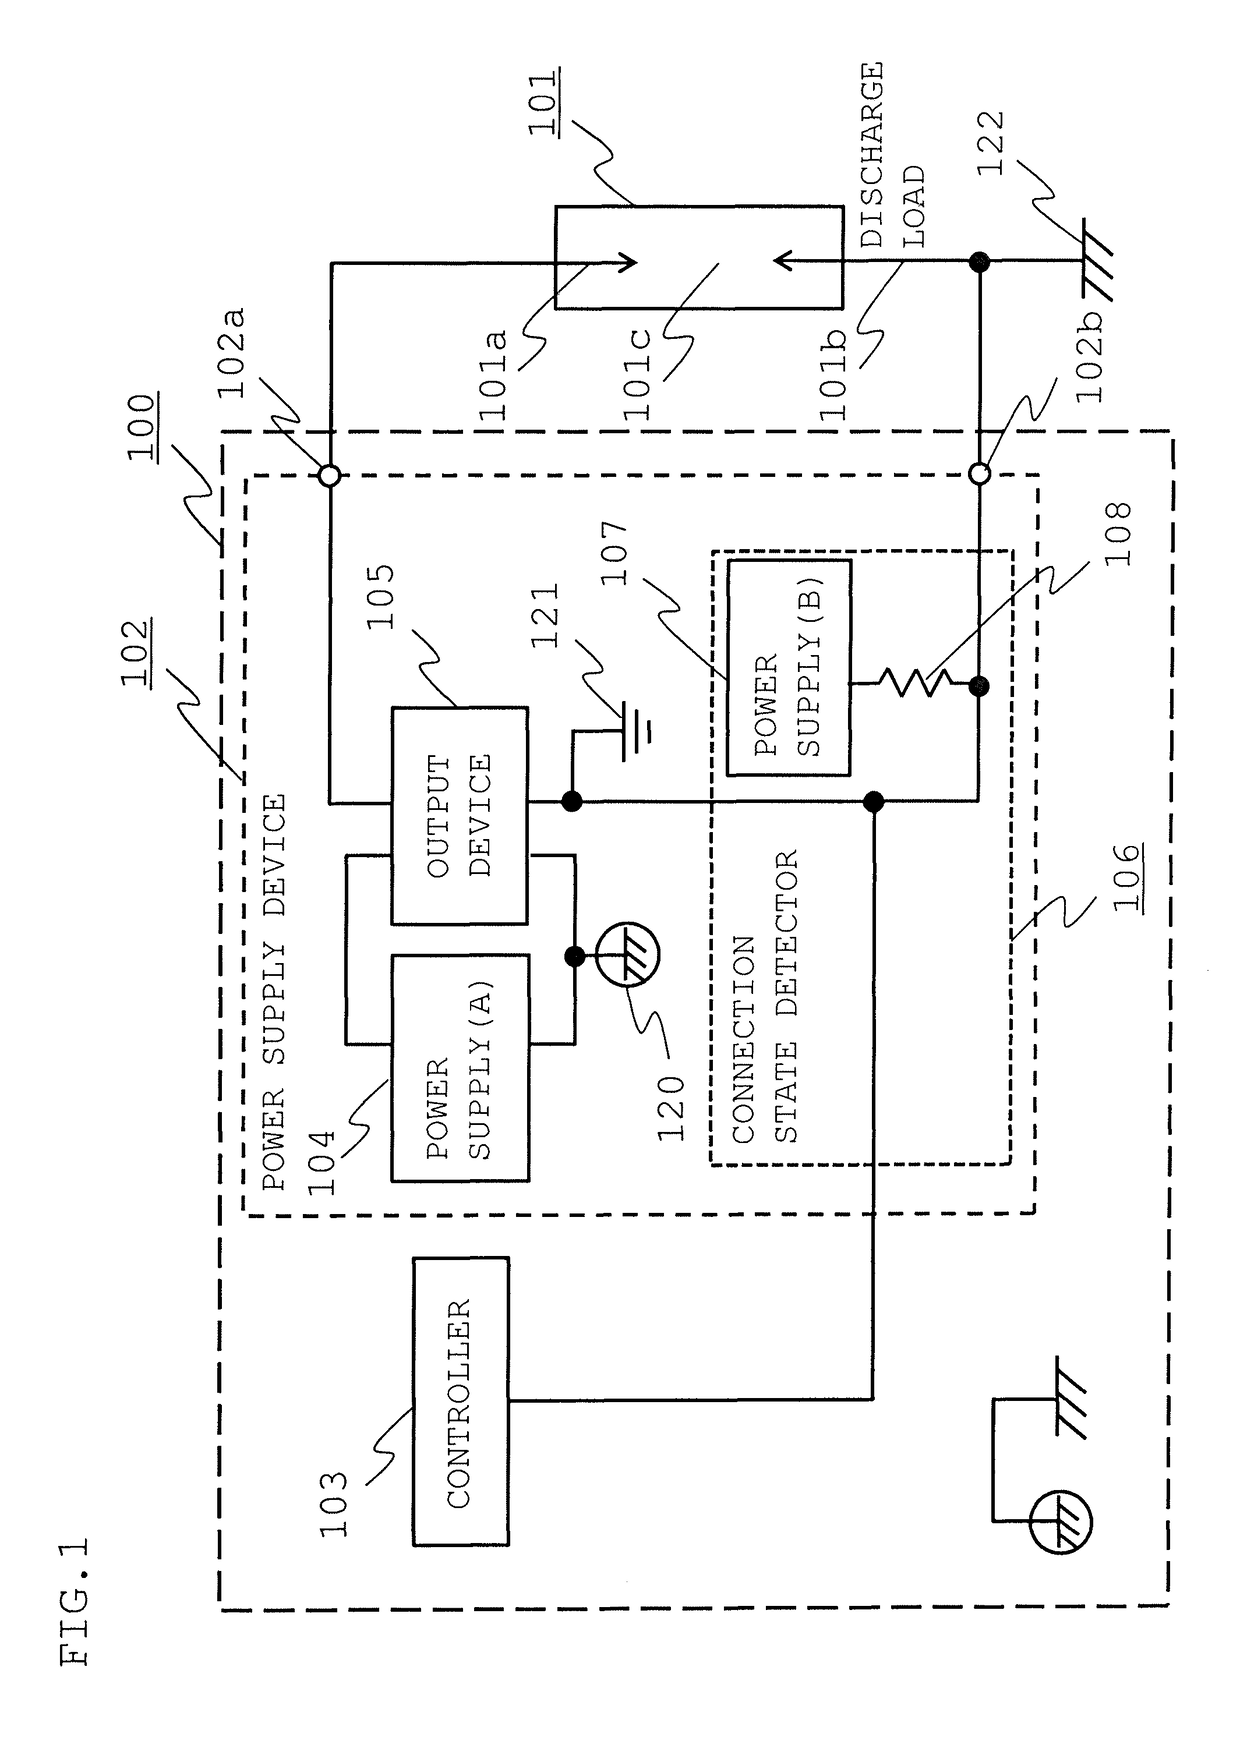 Discharge device